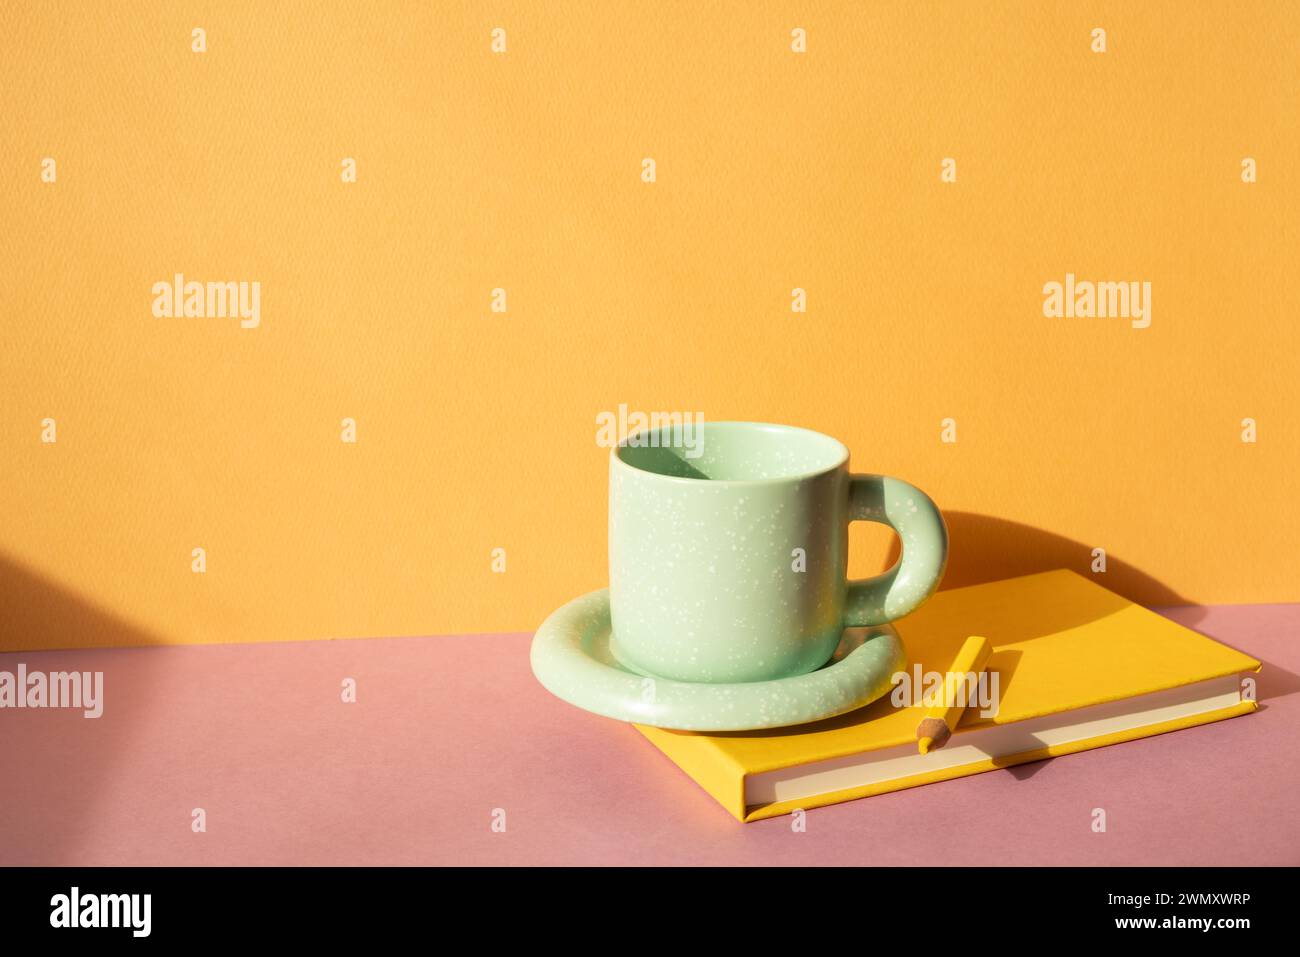 Notebook and colored pencil, coffee cup on pink desk. orange wall background. workspace Stock Photo